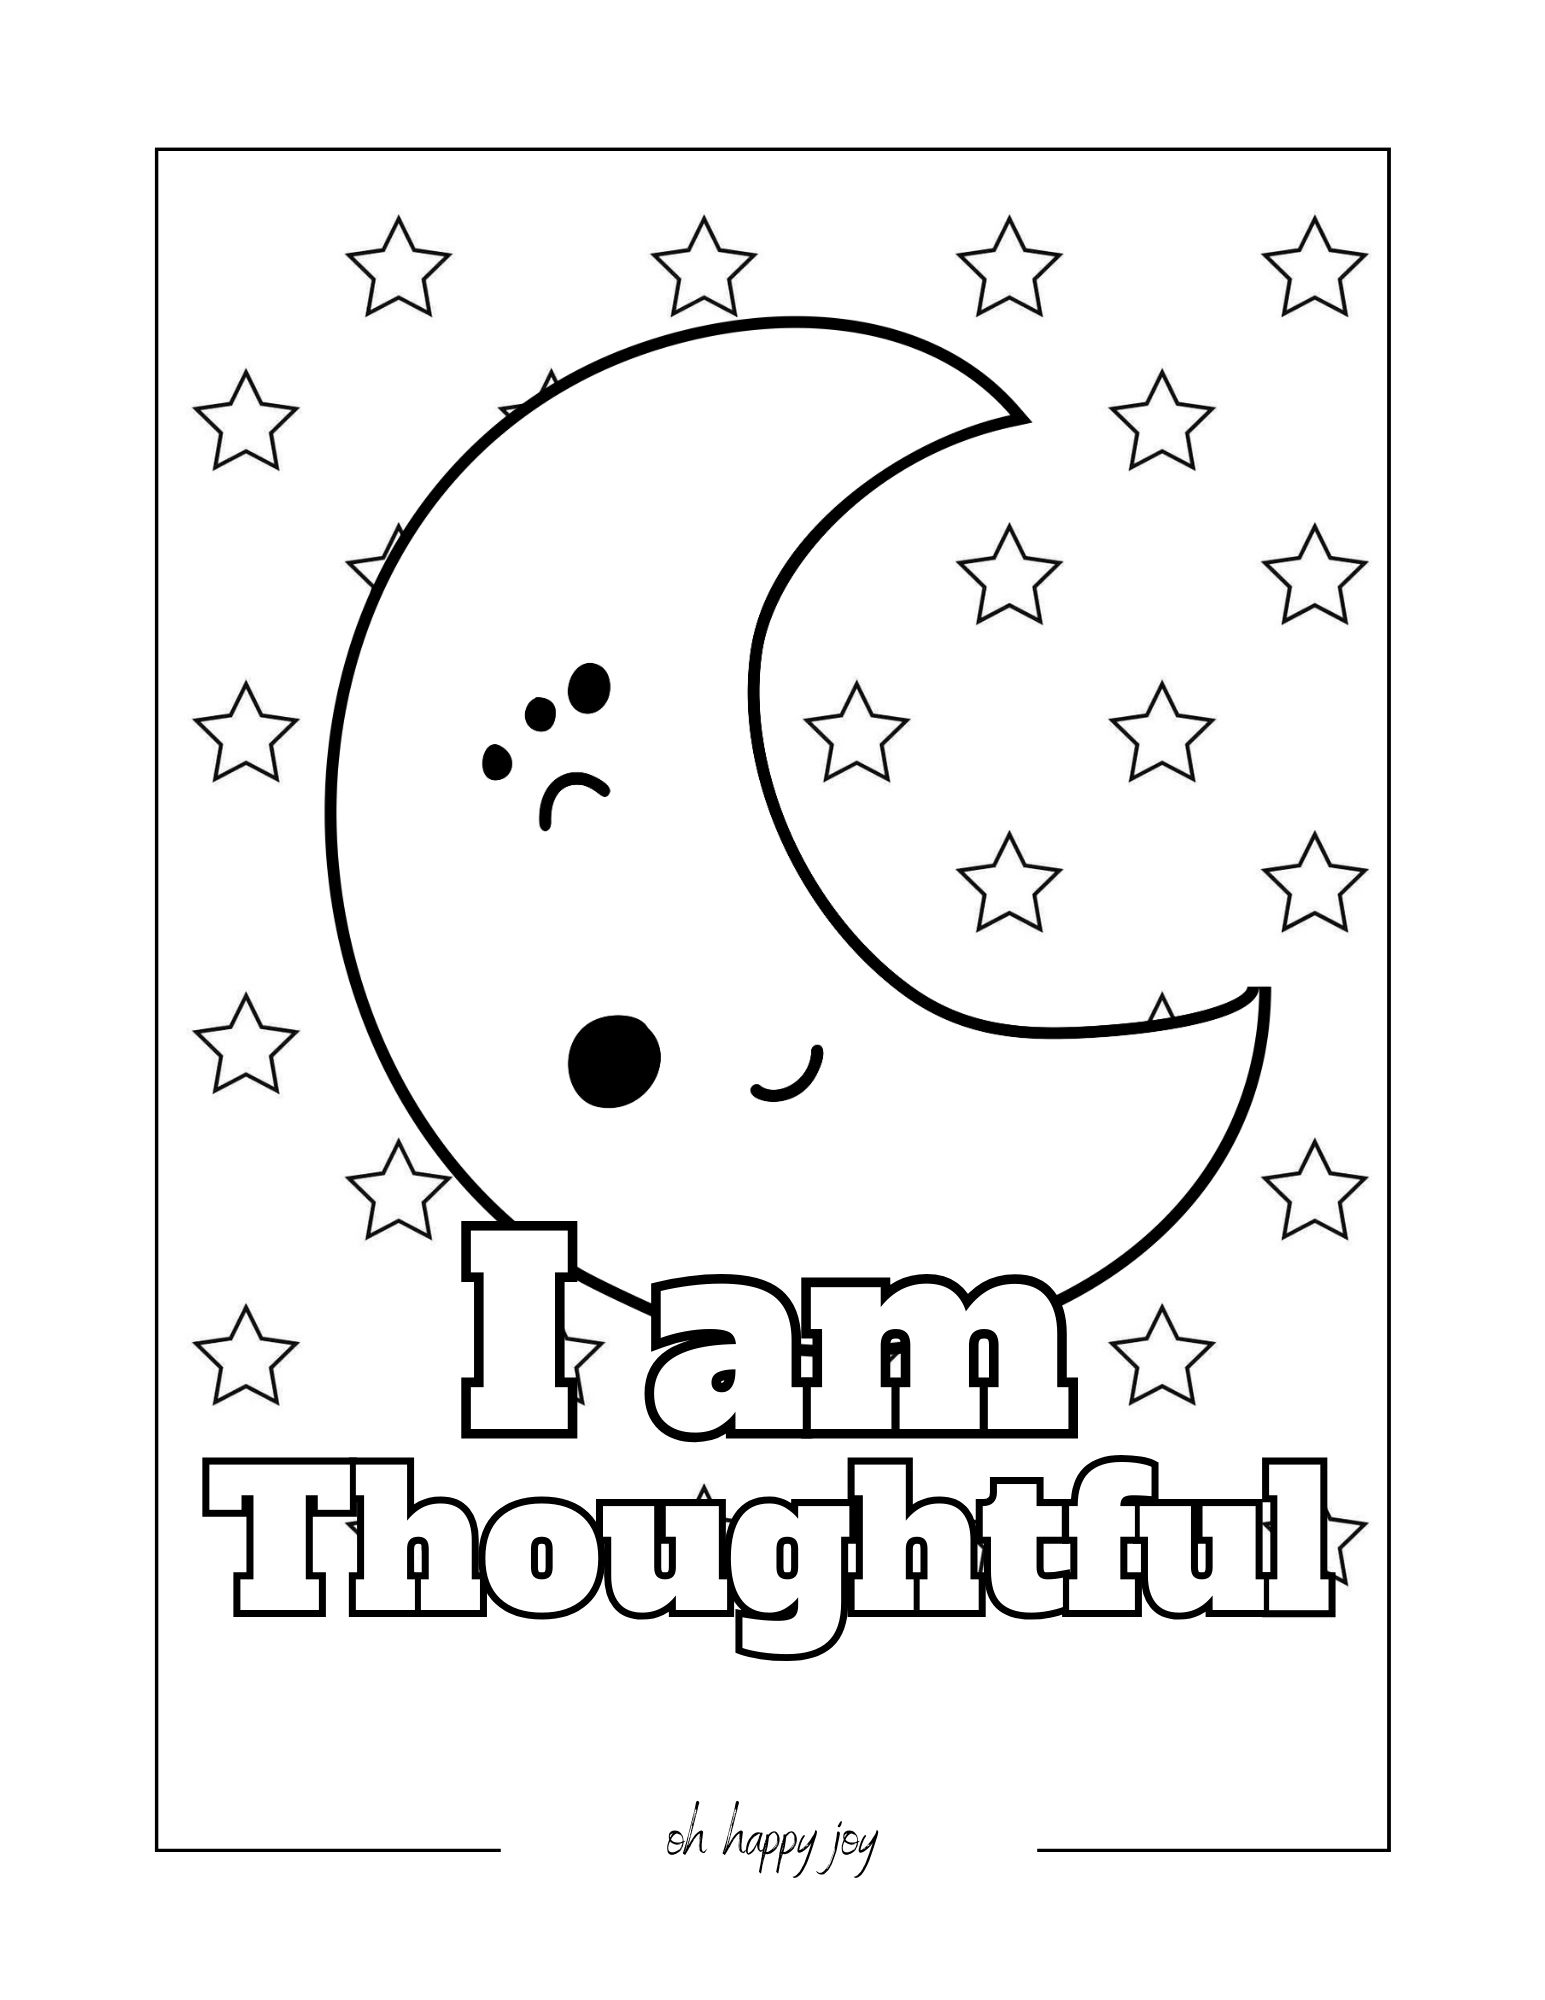 I am thoughtful affirmation coloring page